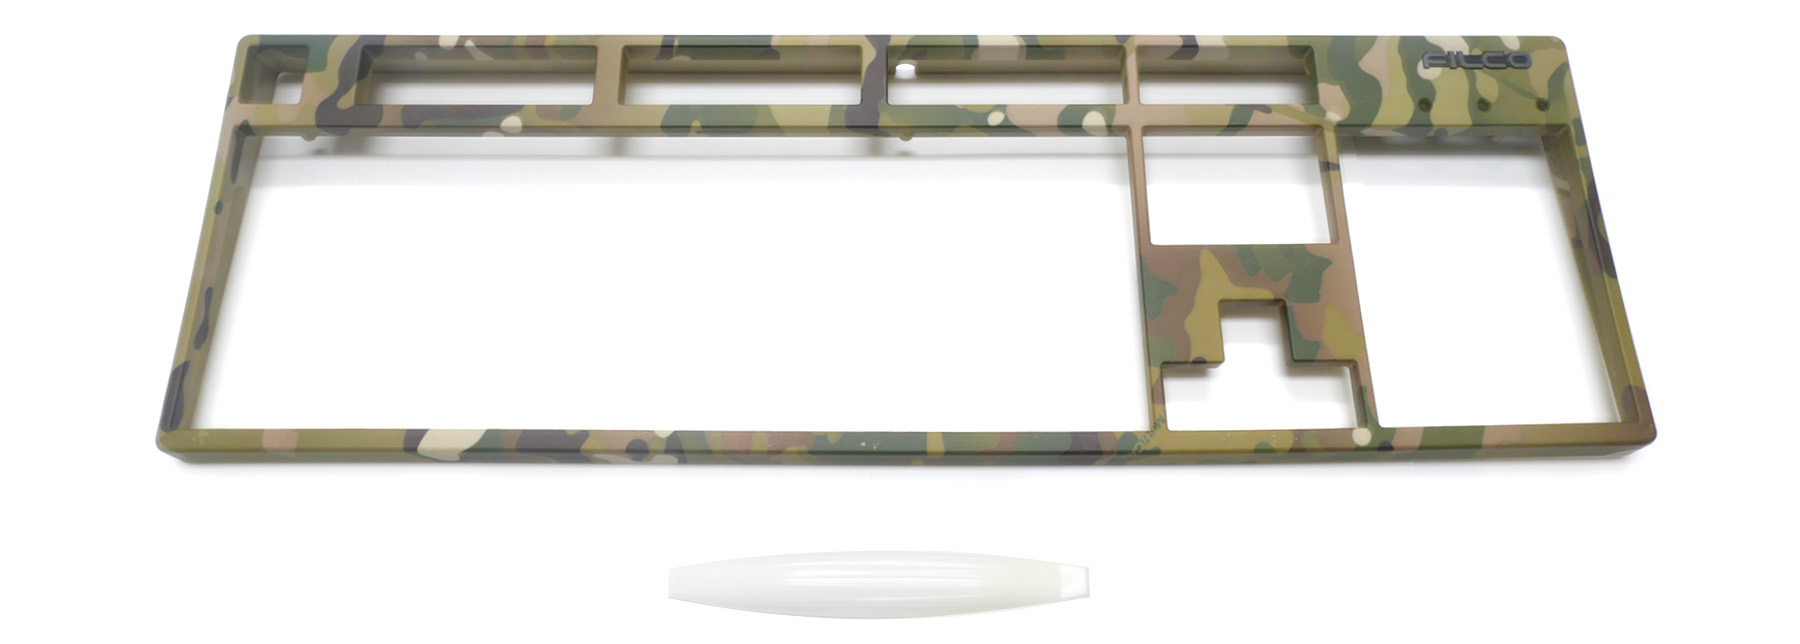 Majestouch 3／Majestouch 2兼用 フルサイズ 交換用フレームセット・Camouflage